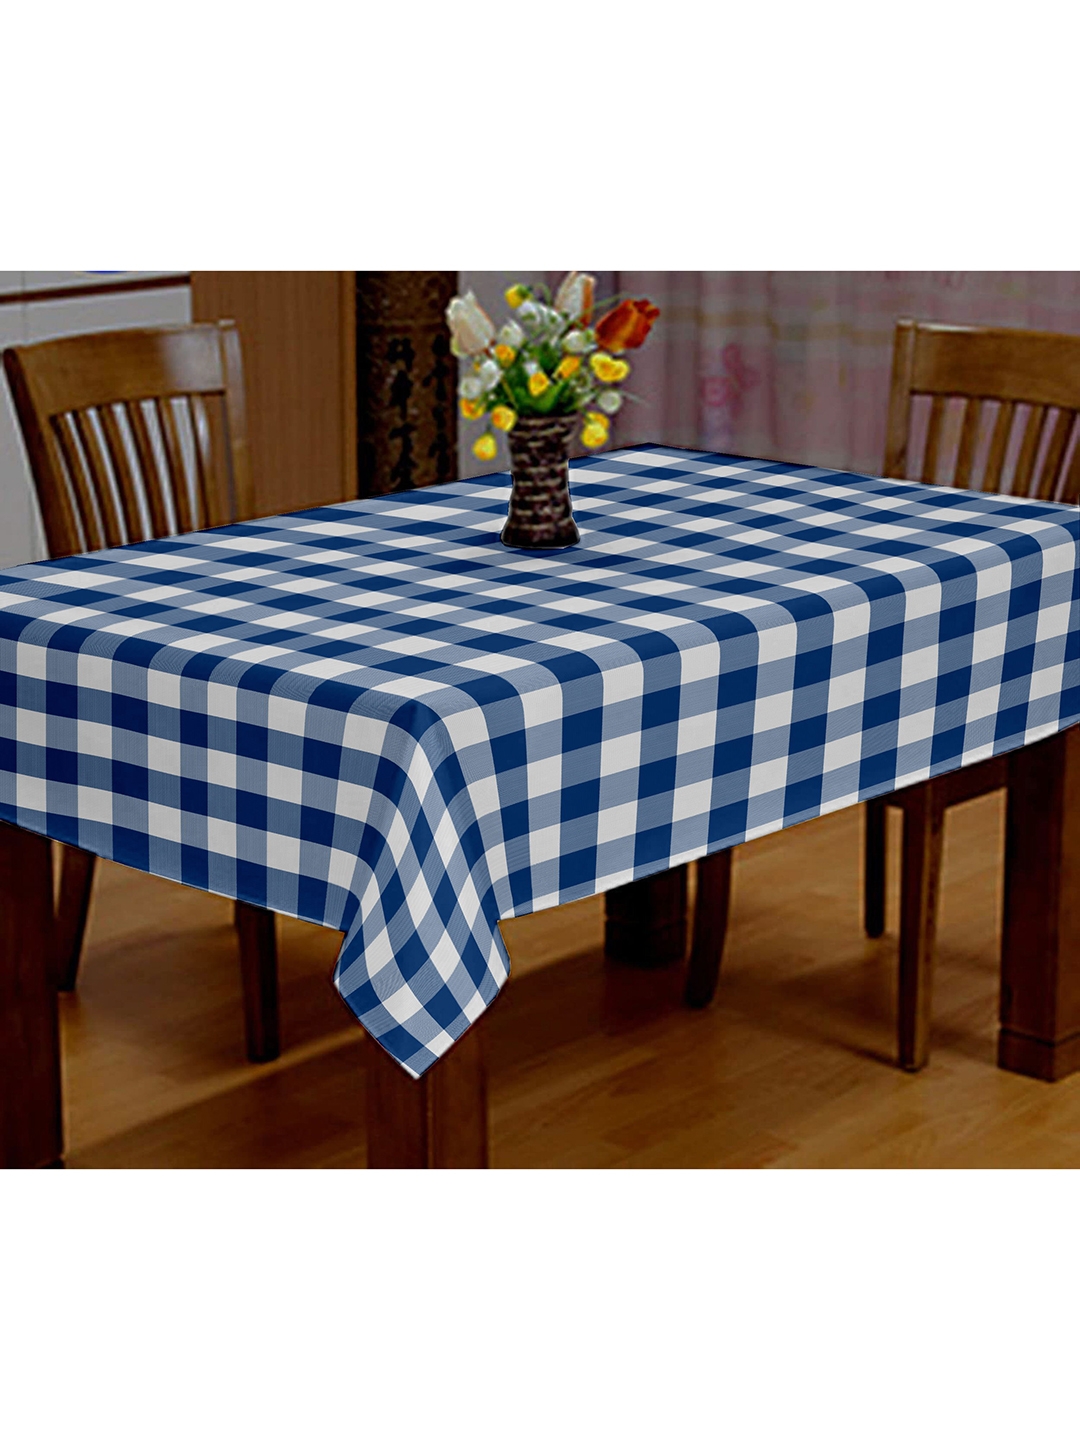 Lushomes Blue Buffalo Checks Printed Square 4 Seater Dining Table Cover